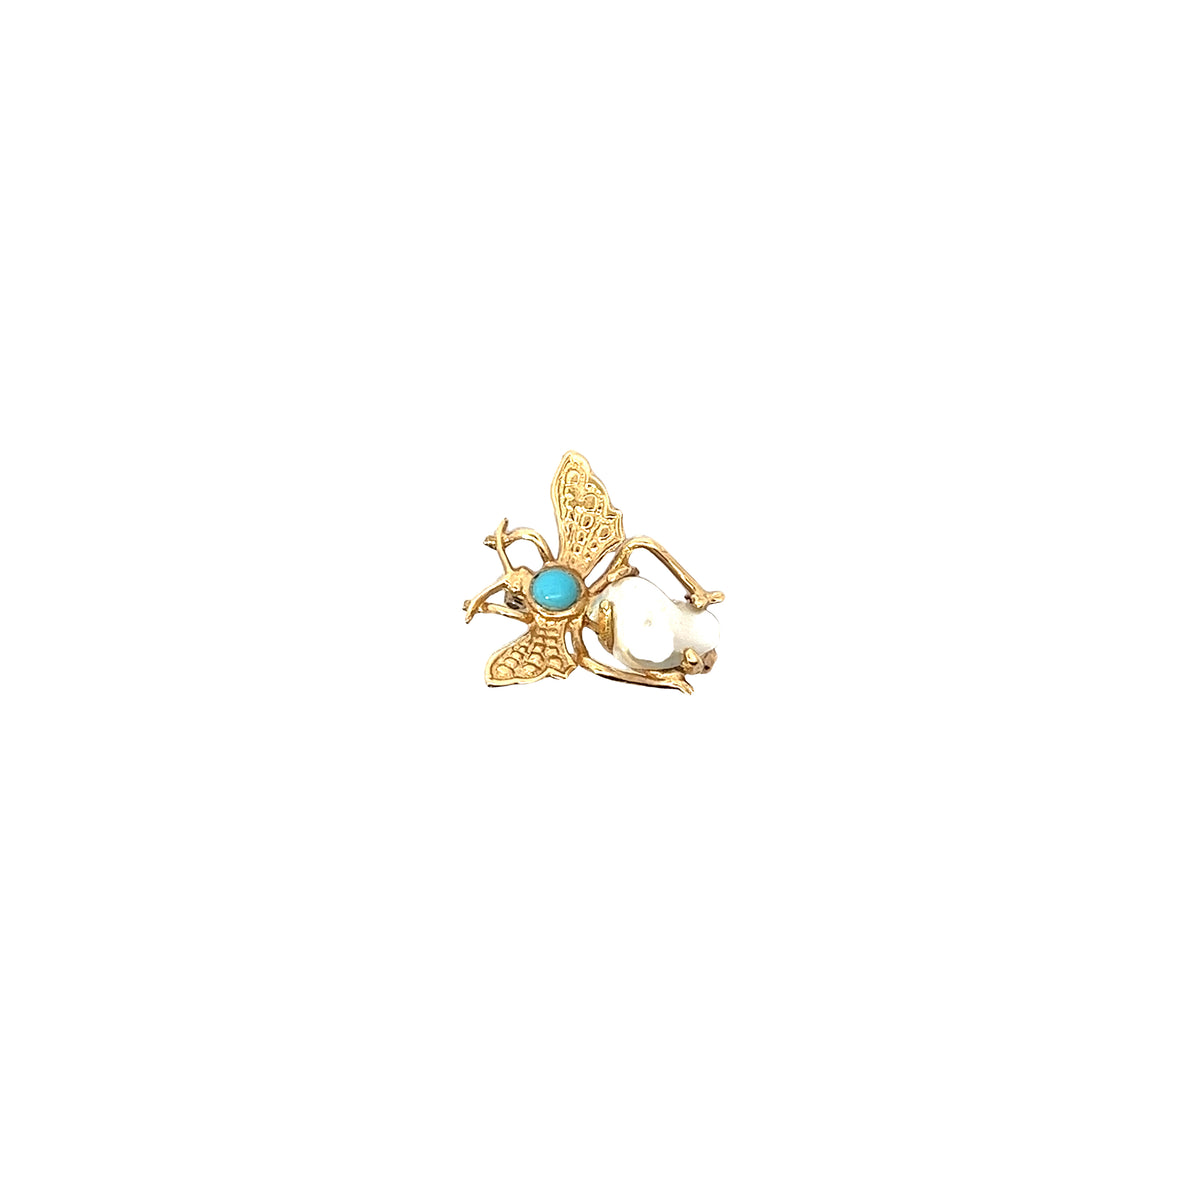 Vintage 14k yellow Gold Turquoise and Pearl Brooch